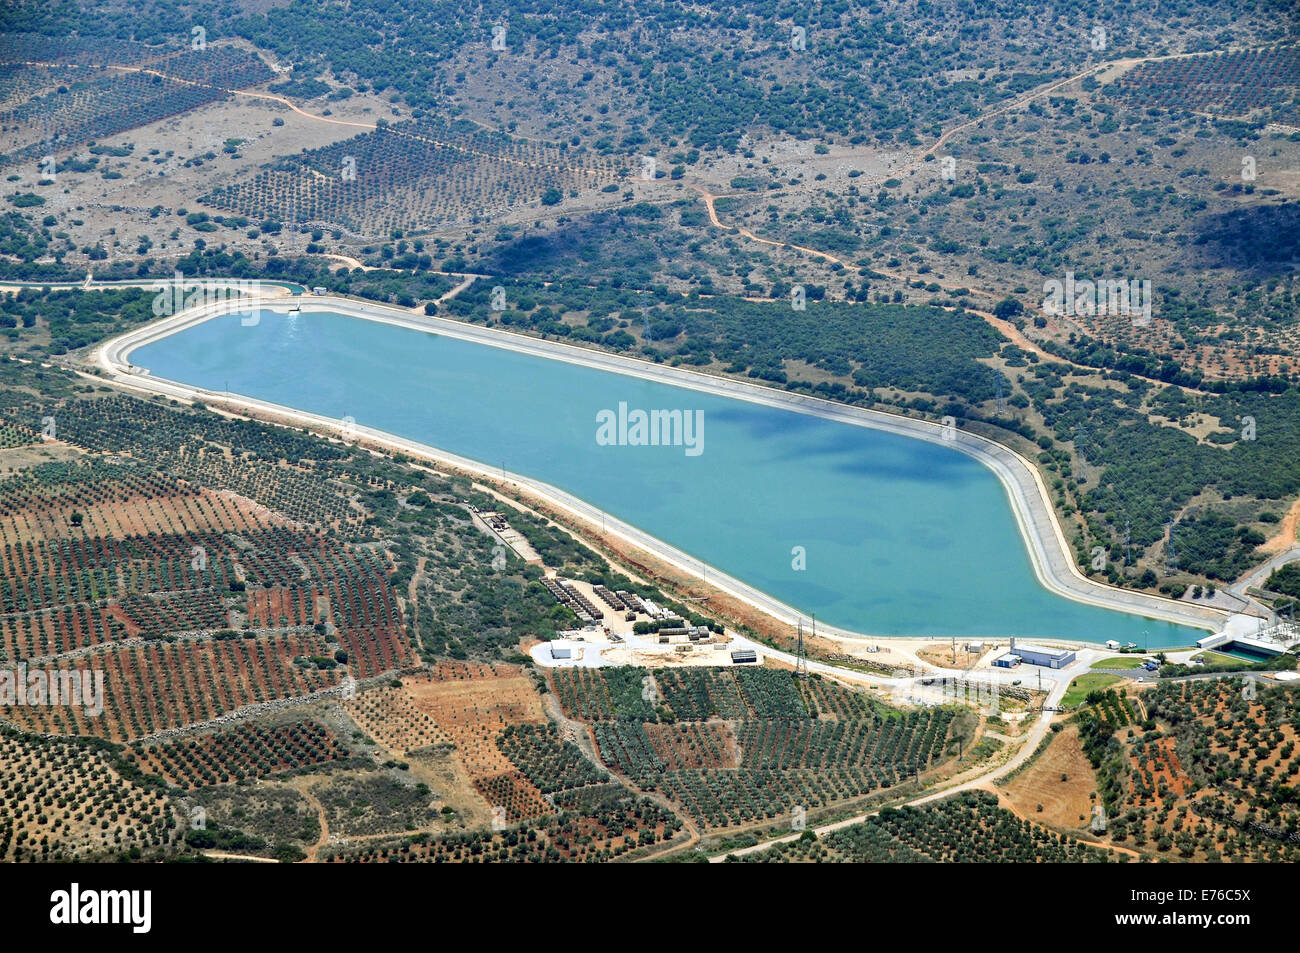 Israel, Lower Galilee, Bet Netofa Valley, Eshkol Central Filtration Plant, Mekorot, The National Water Carrier Aerial view Stock Photo